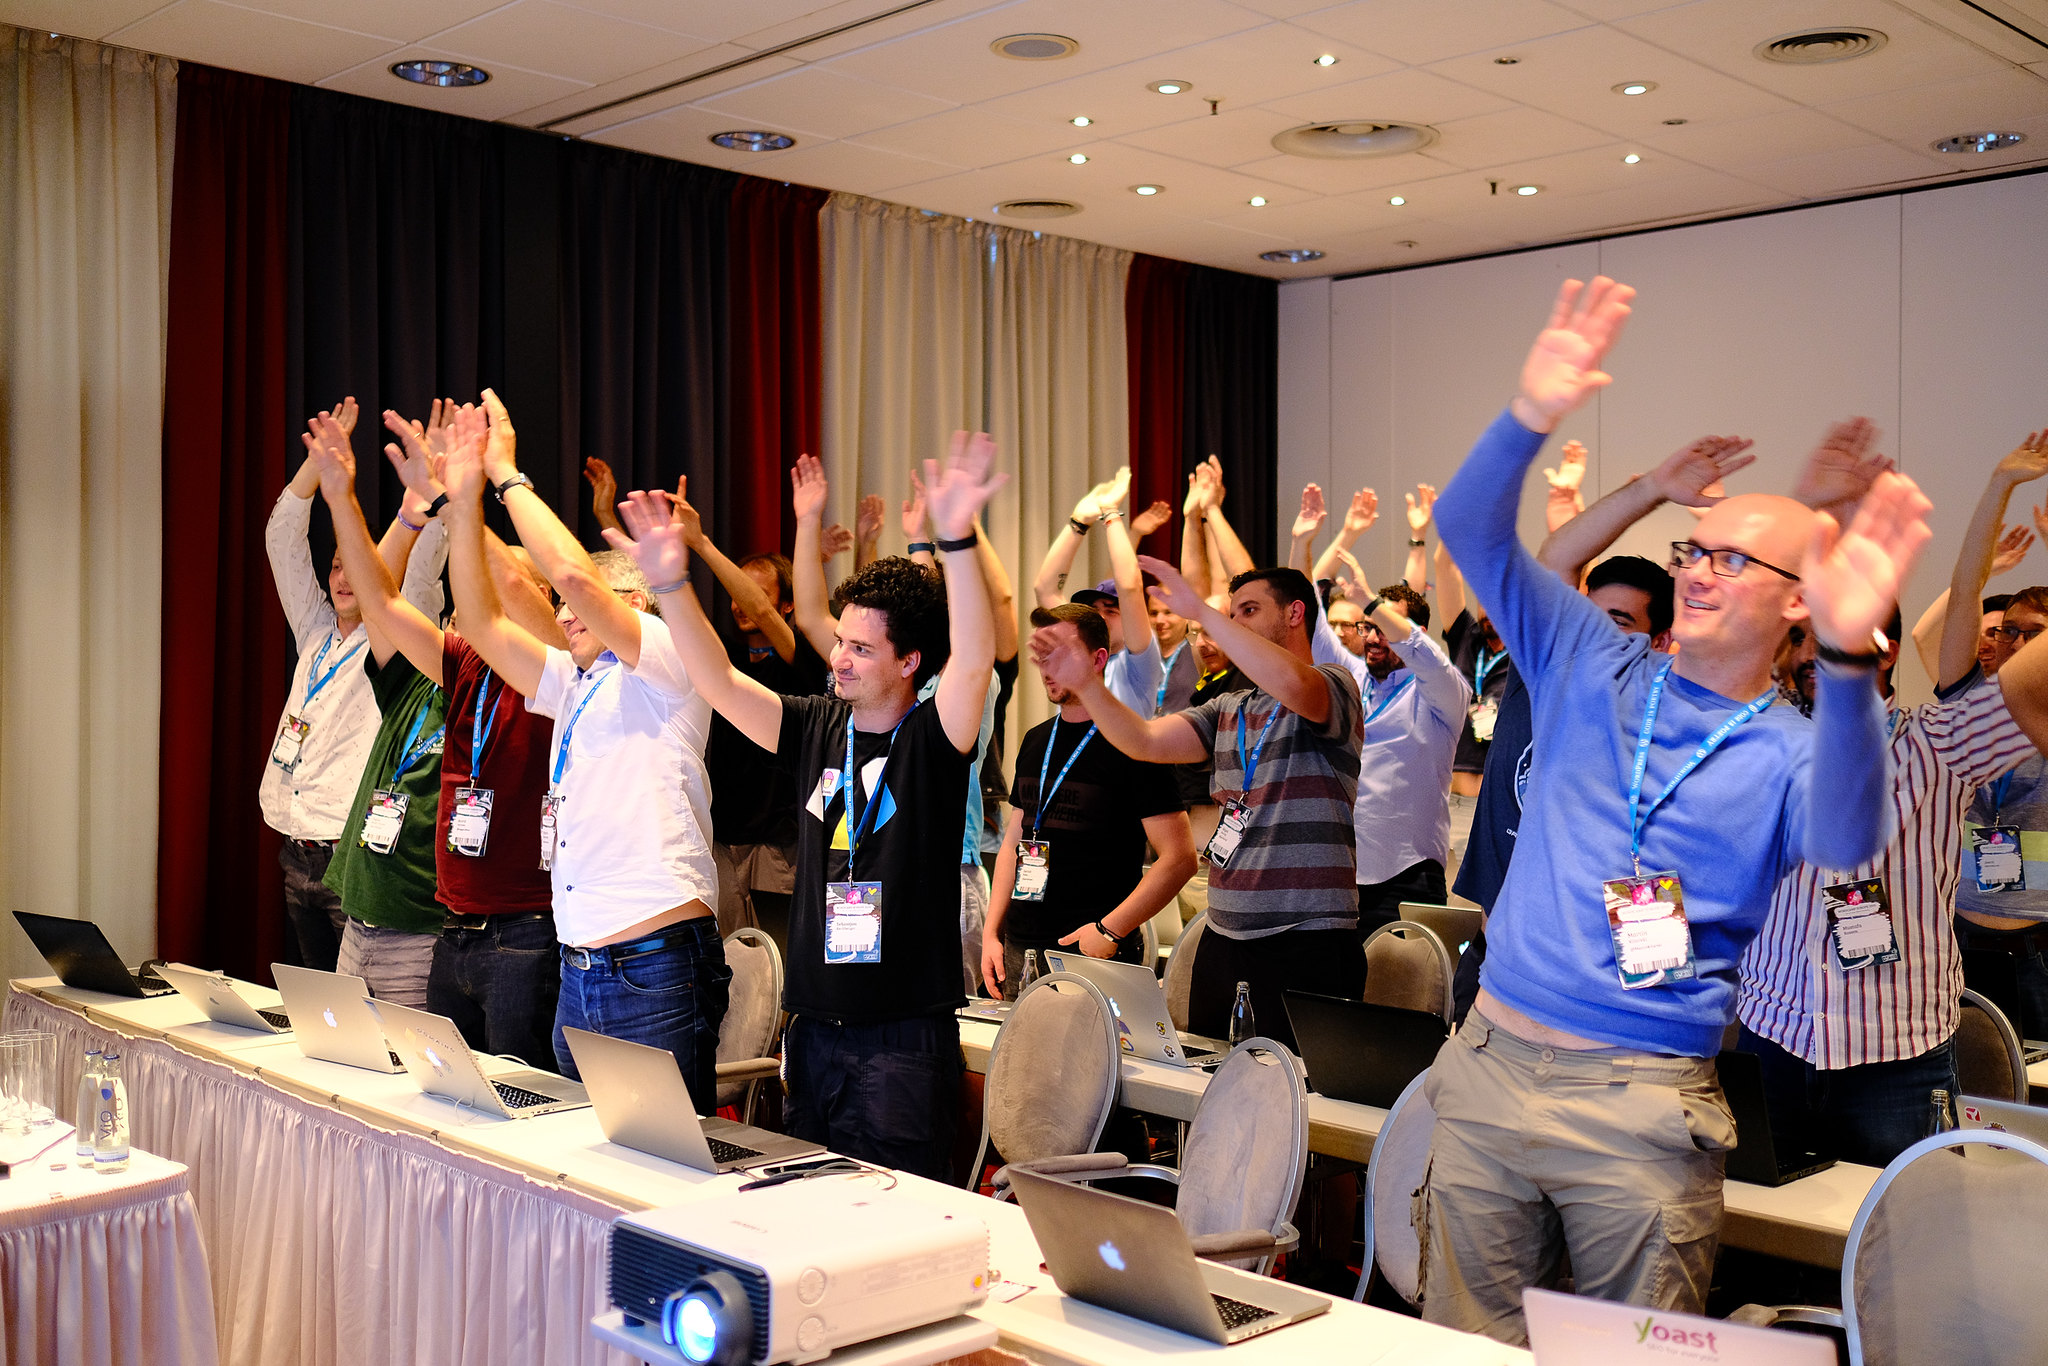 Session attendees with their hands up at WCEU